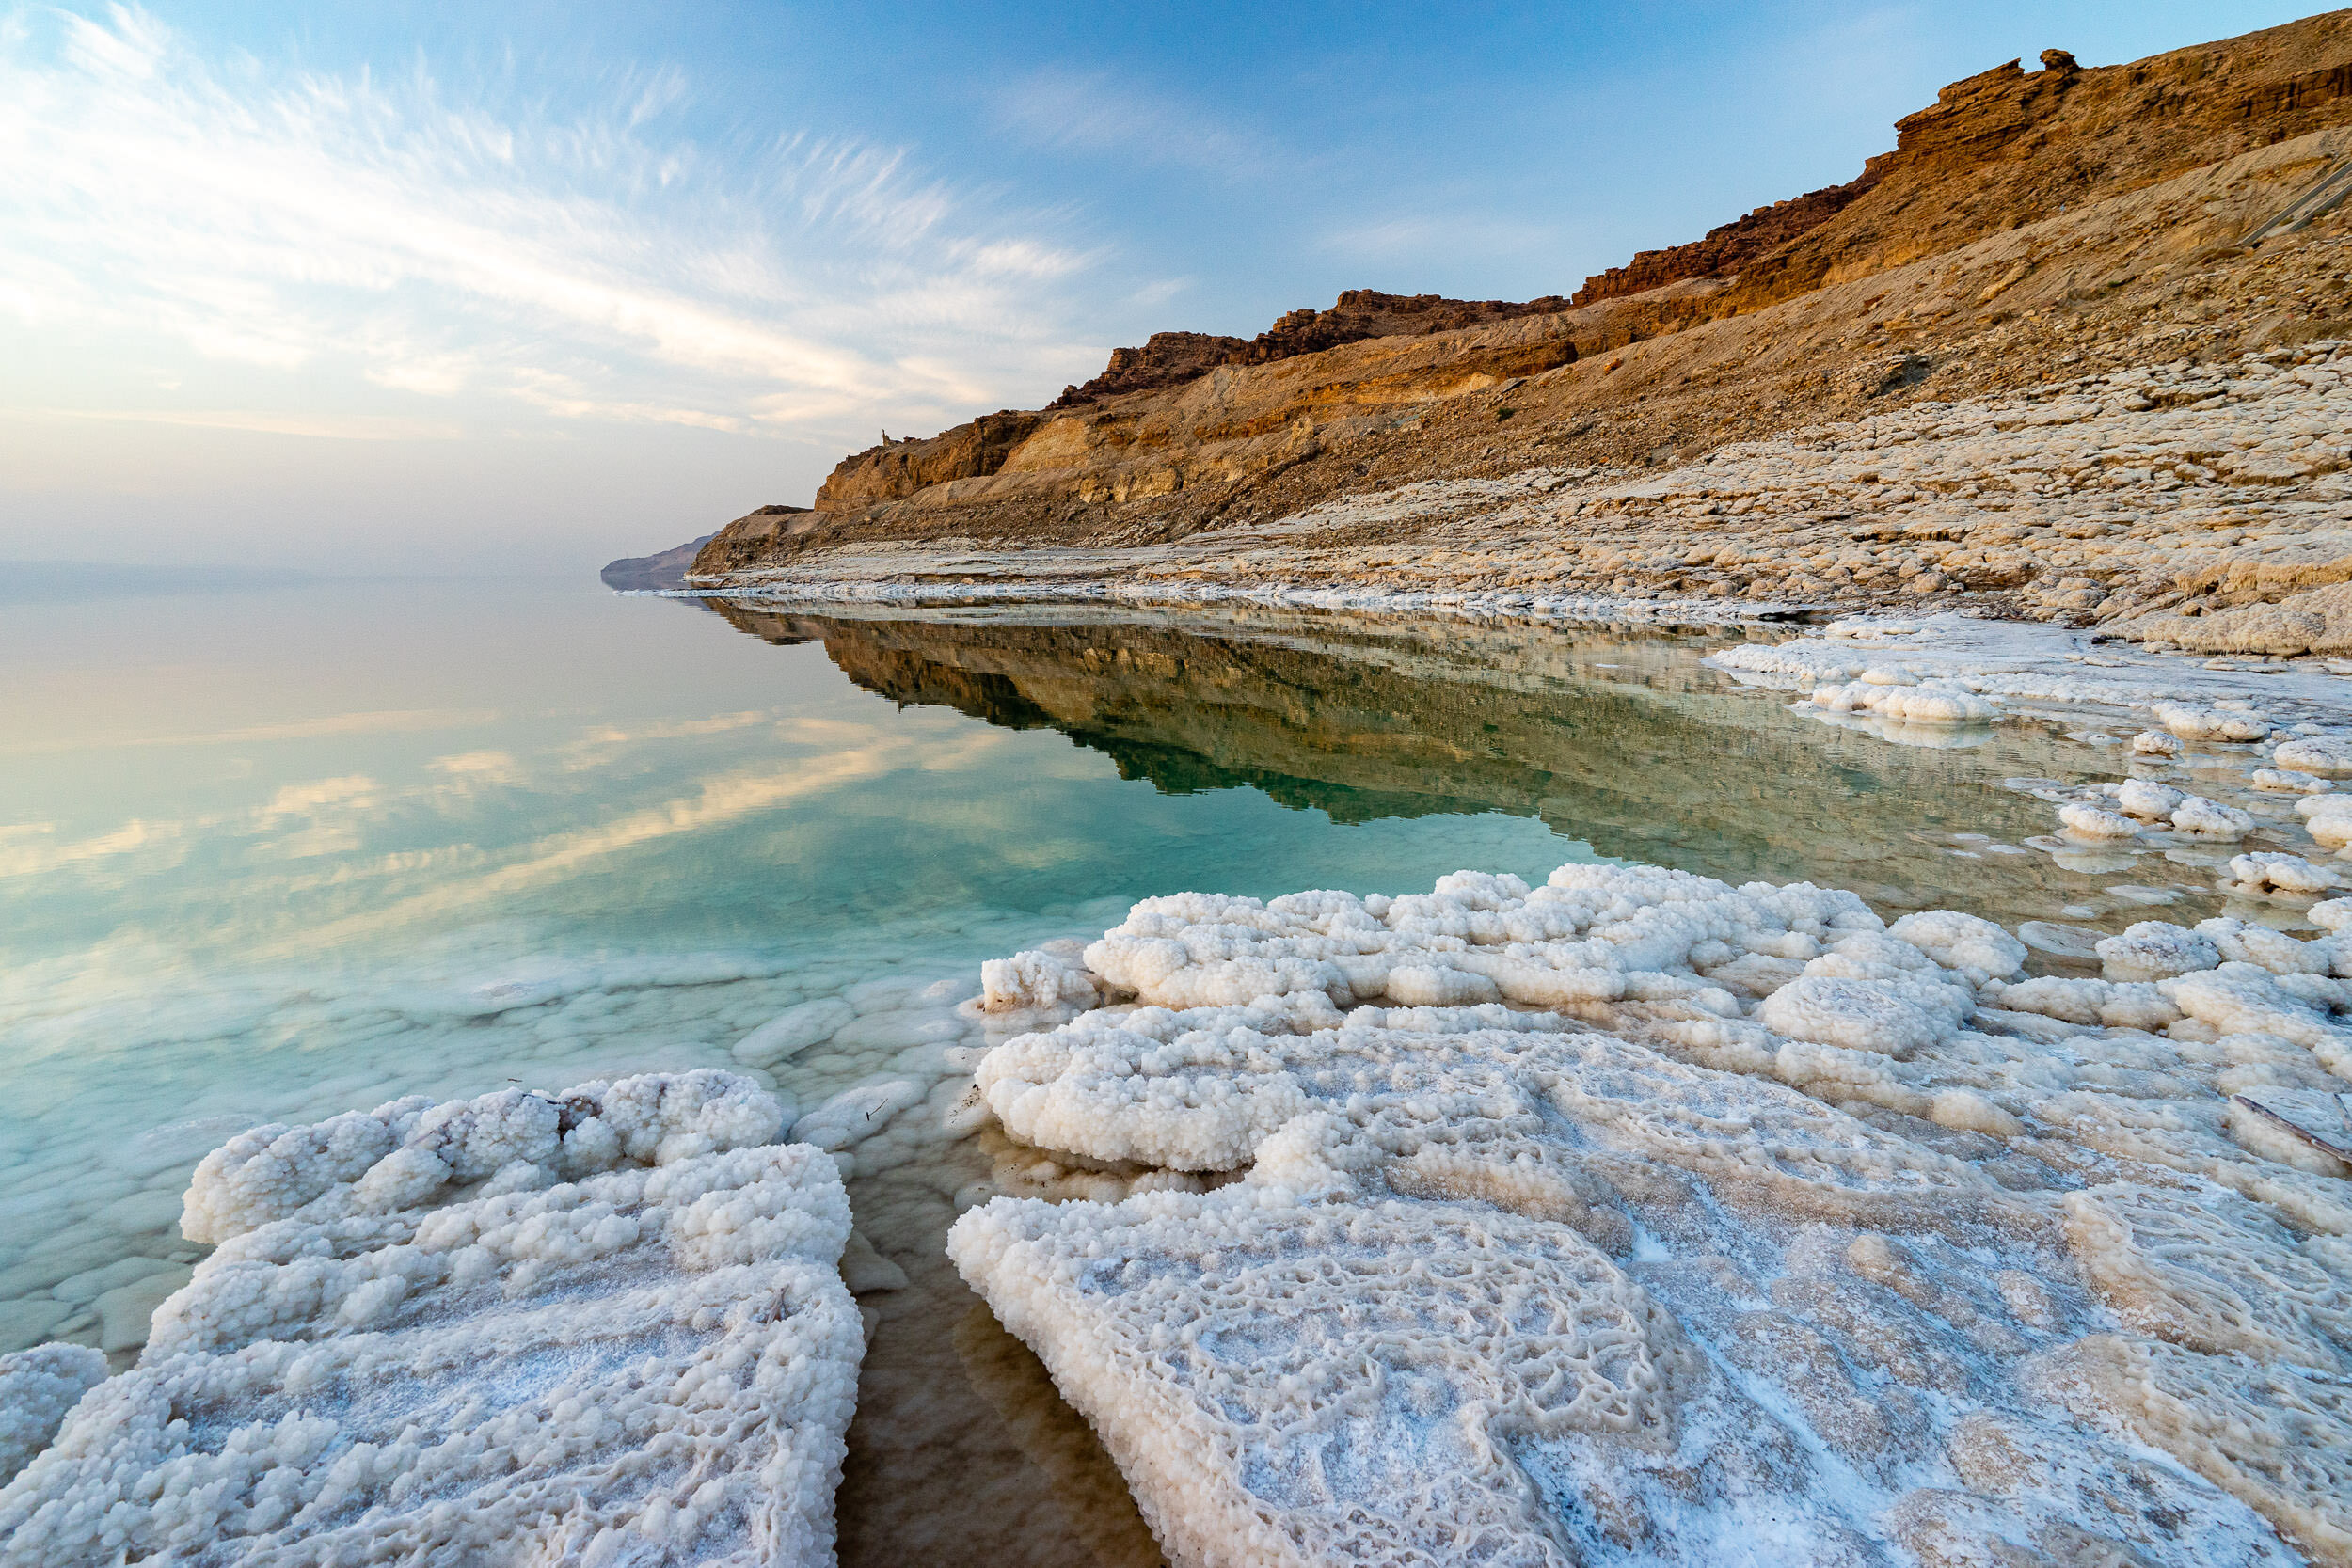 The colors of the Dead Sea at sunset